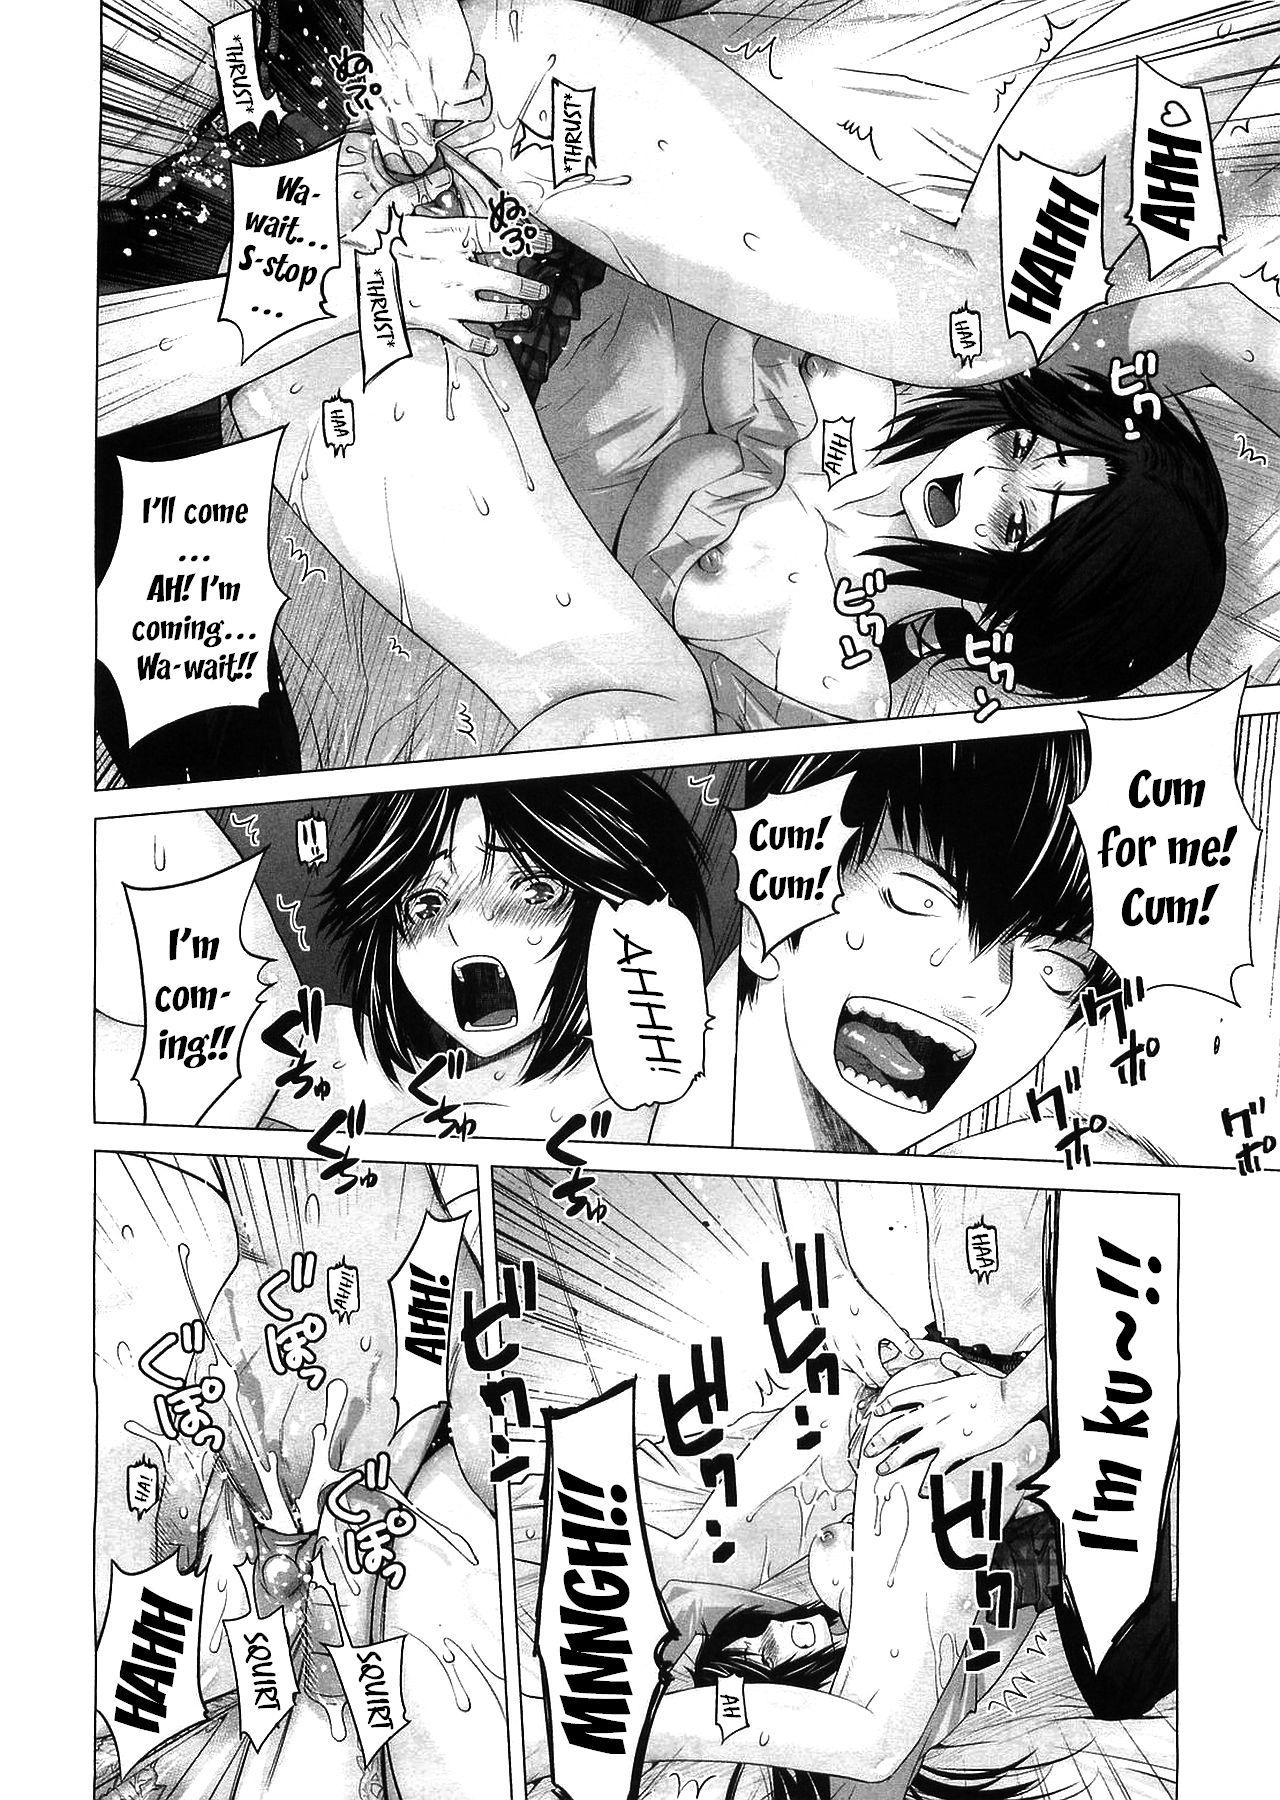 Butt Sex Prunus Persica Dirty - Page 10